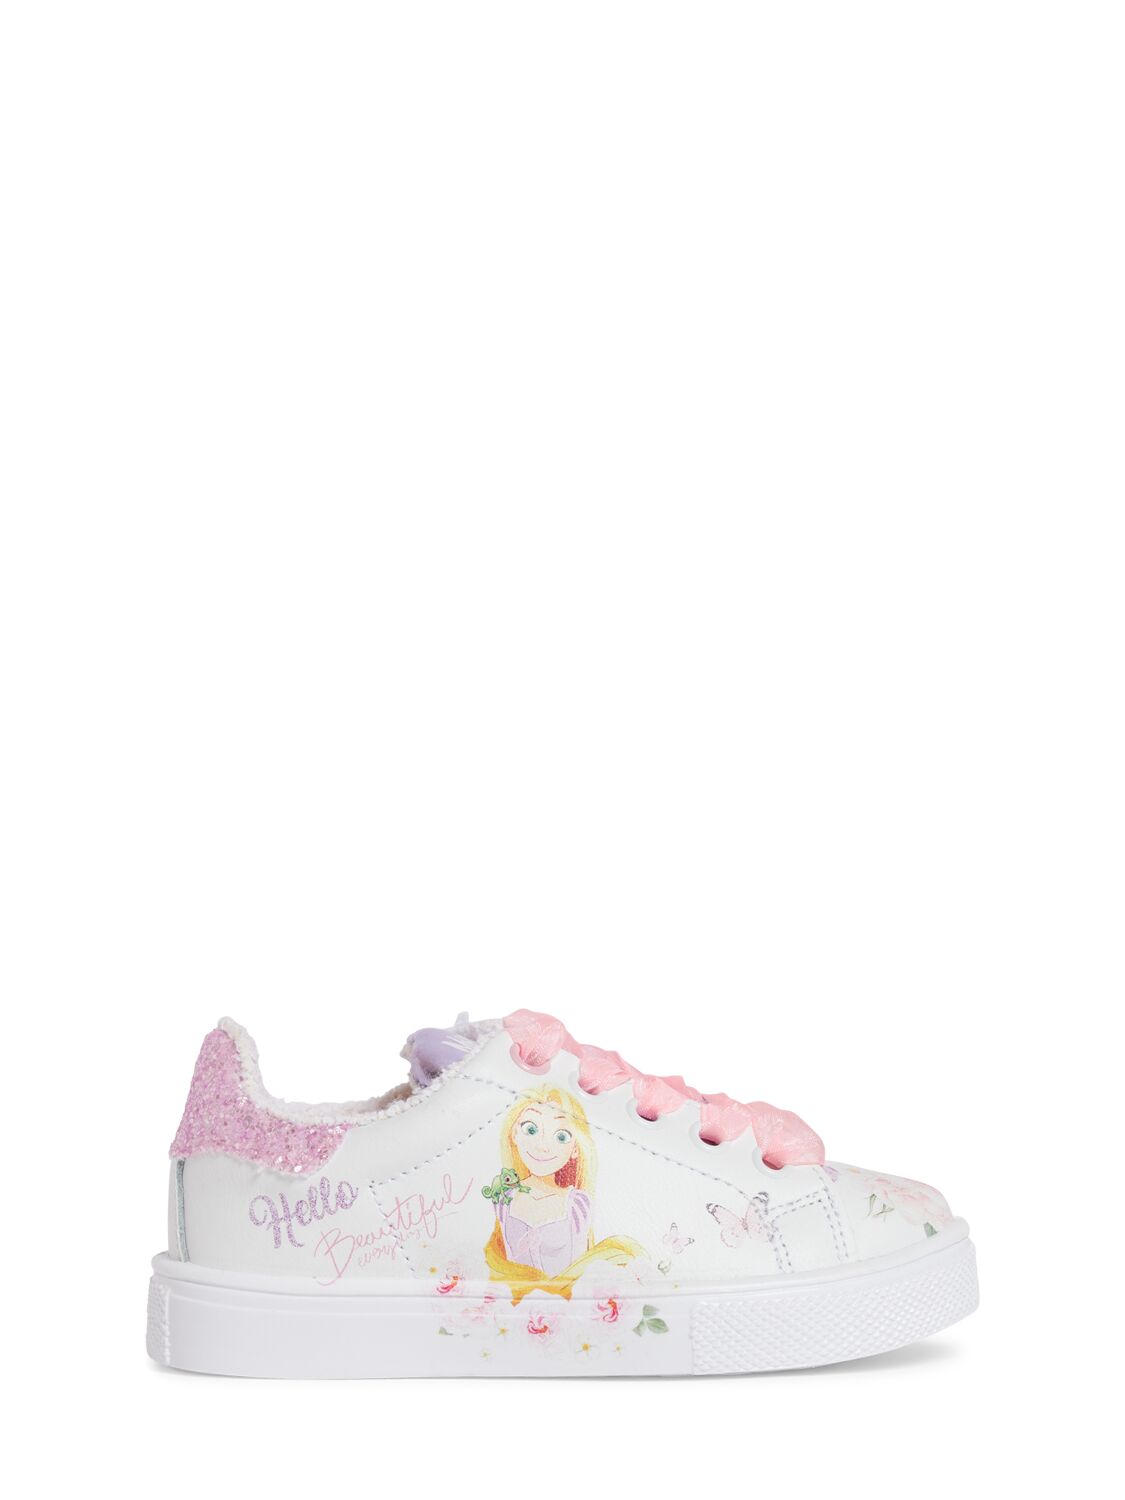 Monnalisa Kids' Frozen Printed Leather Trainers In White,pink